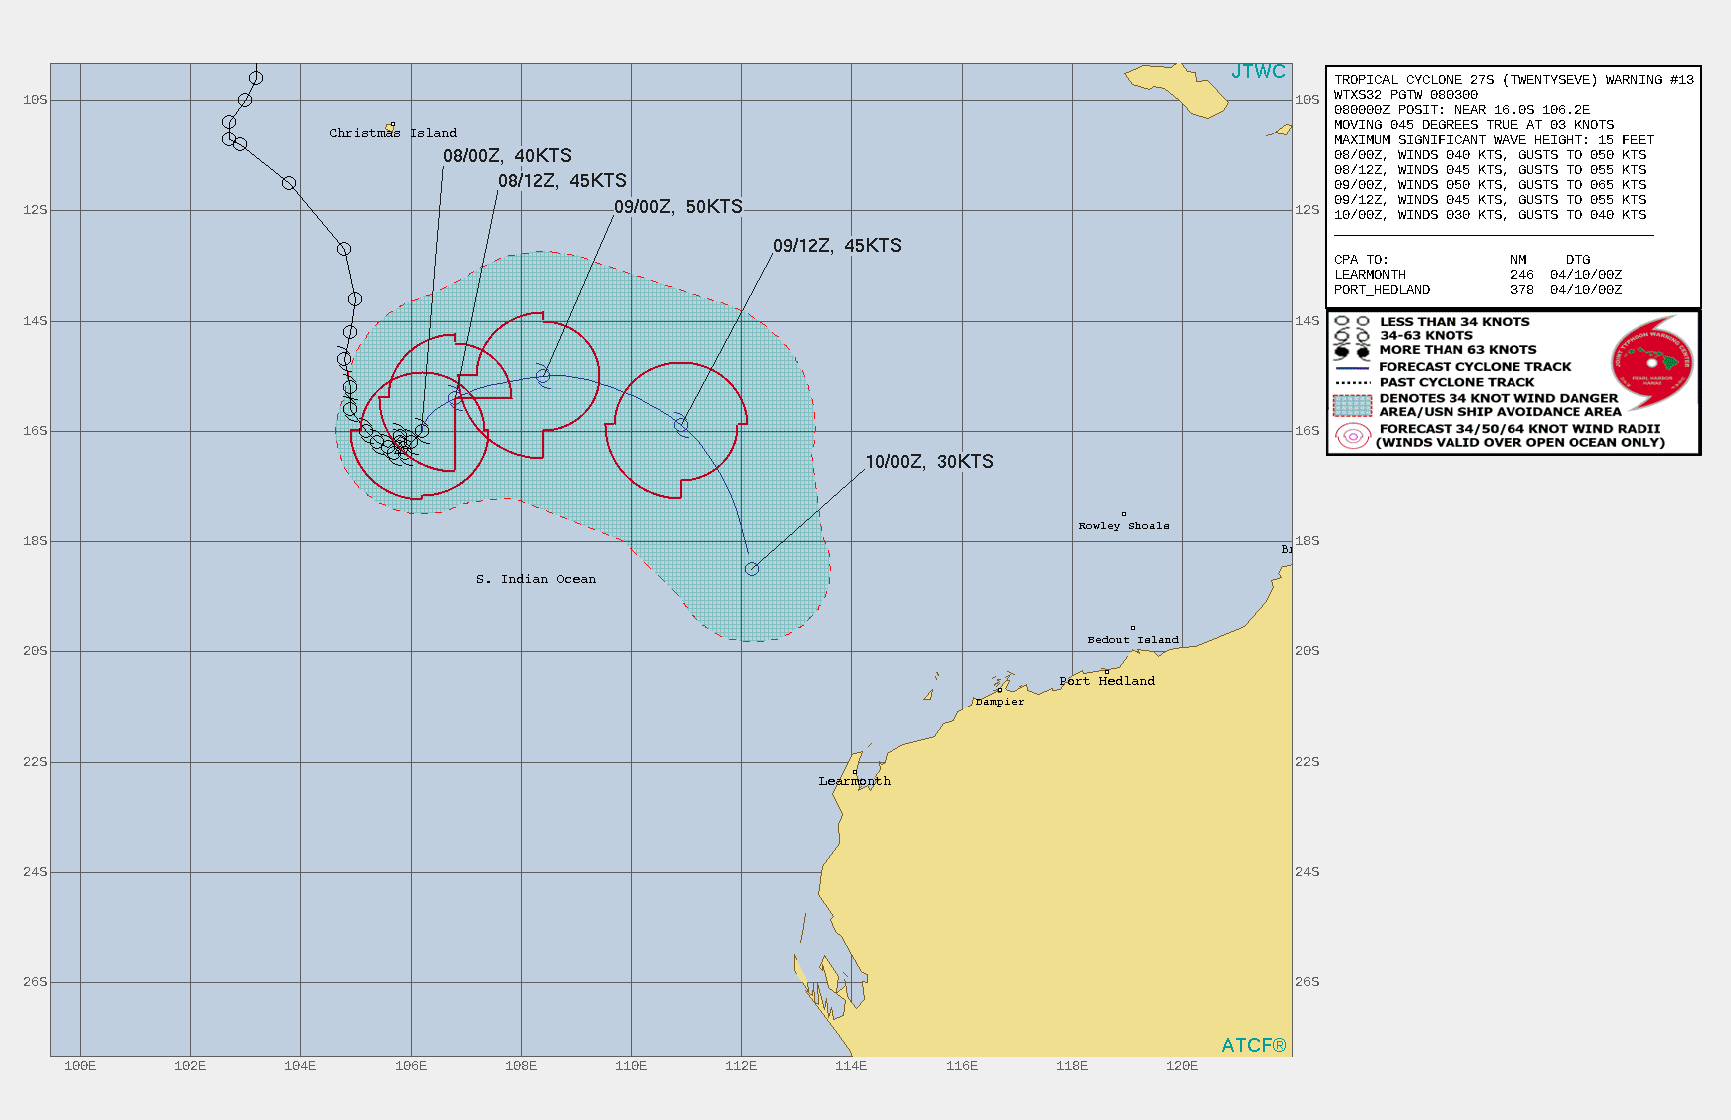 26S. WARNING 14 ISSUED AT 08/09UTC. ANALYSIS INDICATES THE CYCLONE IS IN A MARGINAL ENVIRONMENT WITH STRONG  SUBSIDENCE ALOFT ALONG THE EASTERN HALF DUE TO THE OUTFLOW FROM TC  26S AND MODERATE TO STRONG (20-25KT) EASTERLY VERTICAL WIND SHEAR  THAT ARE PARTLY OFFSET BY WARM (29C) SEA SURFACE TEMPERATURE. THE  SYSTEM IS IN A NEUTRAL AREA BETWEEN A LOW REFLECTION OF THE  SUBTROPICAL RIDGE TO THE SOUTHWEST, WEAK NEAR EQUATORIAL RIDGING TO  THE NORTHWEST, AND OUTFLOW PRESSURE FROM AN APPROACHING TC 26S,  CURRENTLY 650KM TO THE EAST. AS TC 26S GETS CLOSER, A BINARY  INTERACTION WILL COMMENCE DUE TO FUJIWARA EFFECT RESULTING IN TC 26S  TRACKING CYCLONICALLY INTO AN ARC NORTHEASTWARD. THE WARM WATER AND  INCREASED OUTFLOW WILL MARGINALLY OFFSET THE VWS AND PROMOTE A  MODEST INTENSIFICATION TO A PEAK OF 50KNOTS AS IT CRESTS THE ARC.  AFTERWARD, IT WILL RAPIDLY DECAY AS IT GETS RAPIDLY ABSORBED INTO  THE LARGER AND MUCH MORE DOMINANT TC 26S LEADING TO DISSIPATION BY  36H, POSSIBLY SOONER.